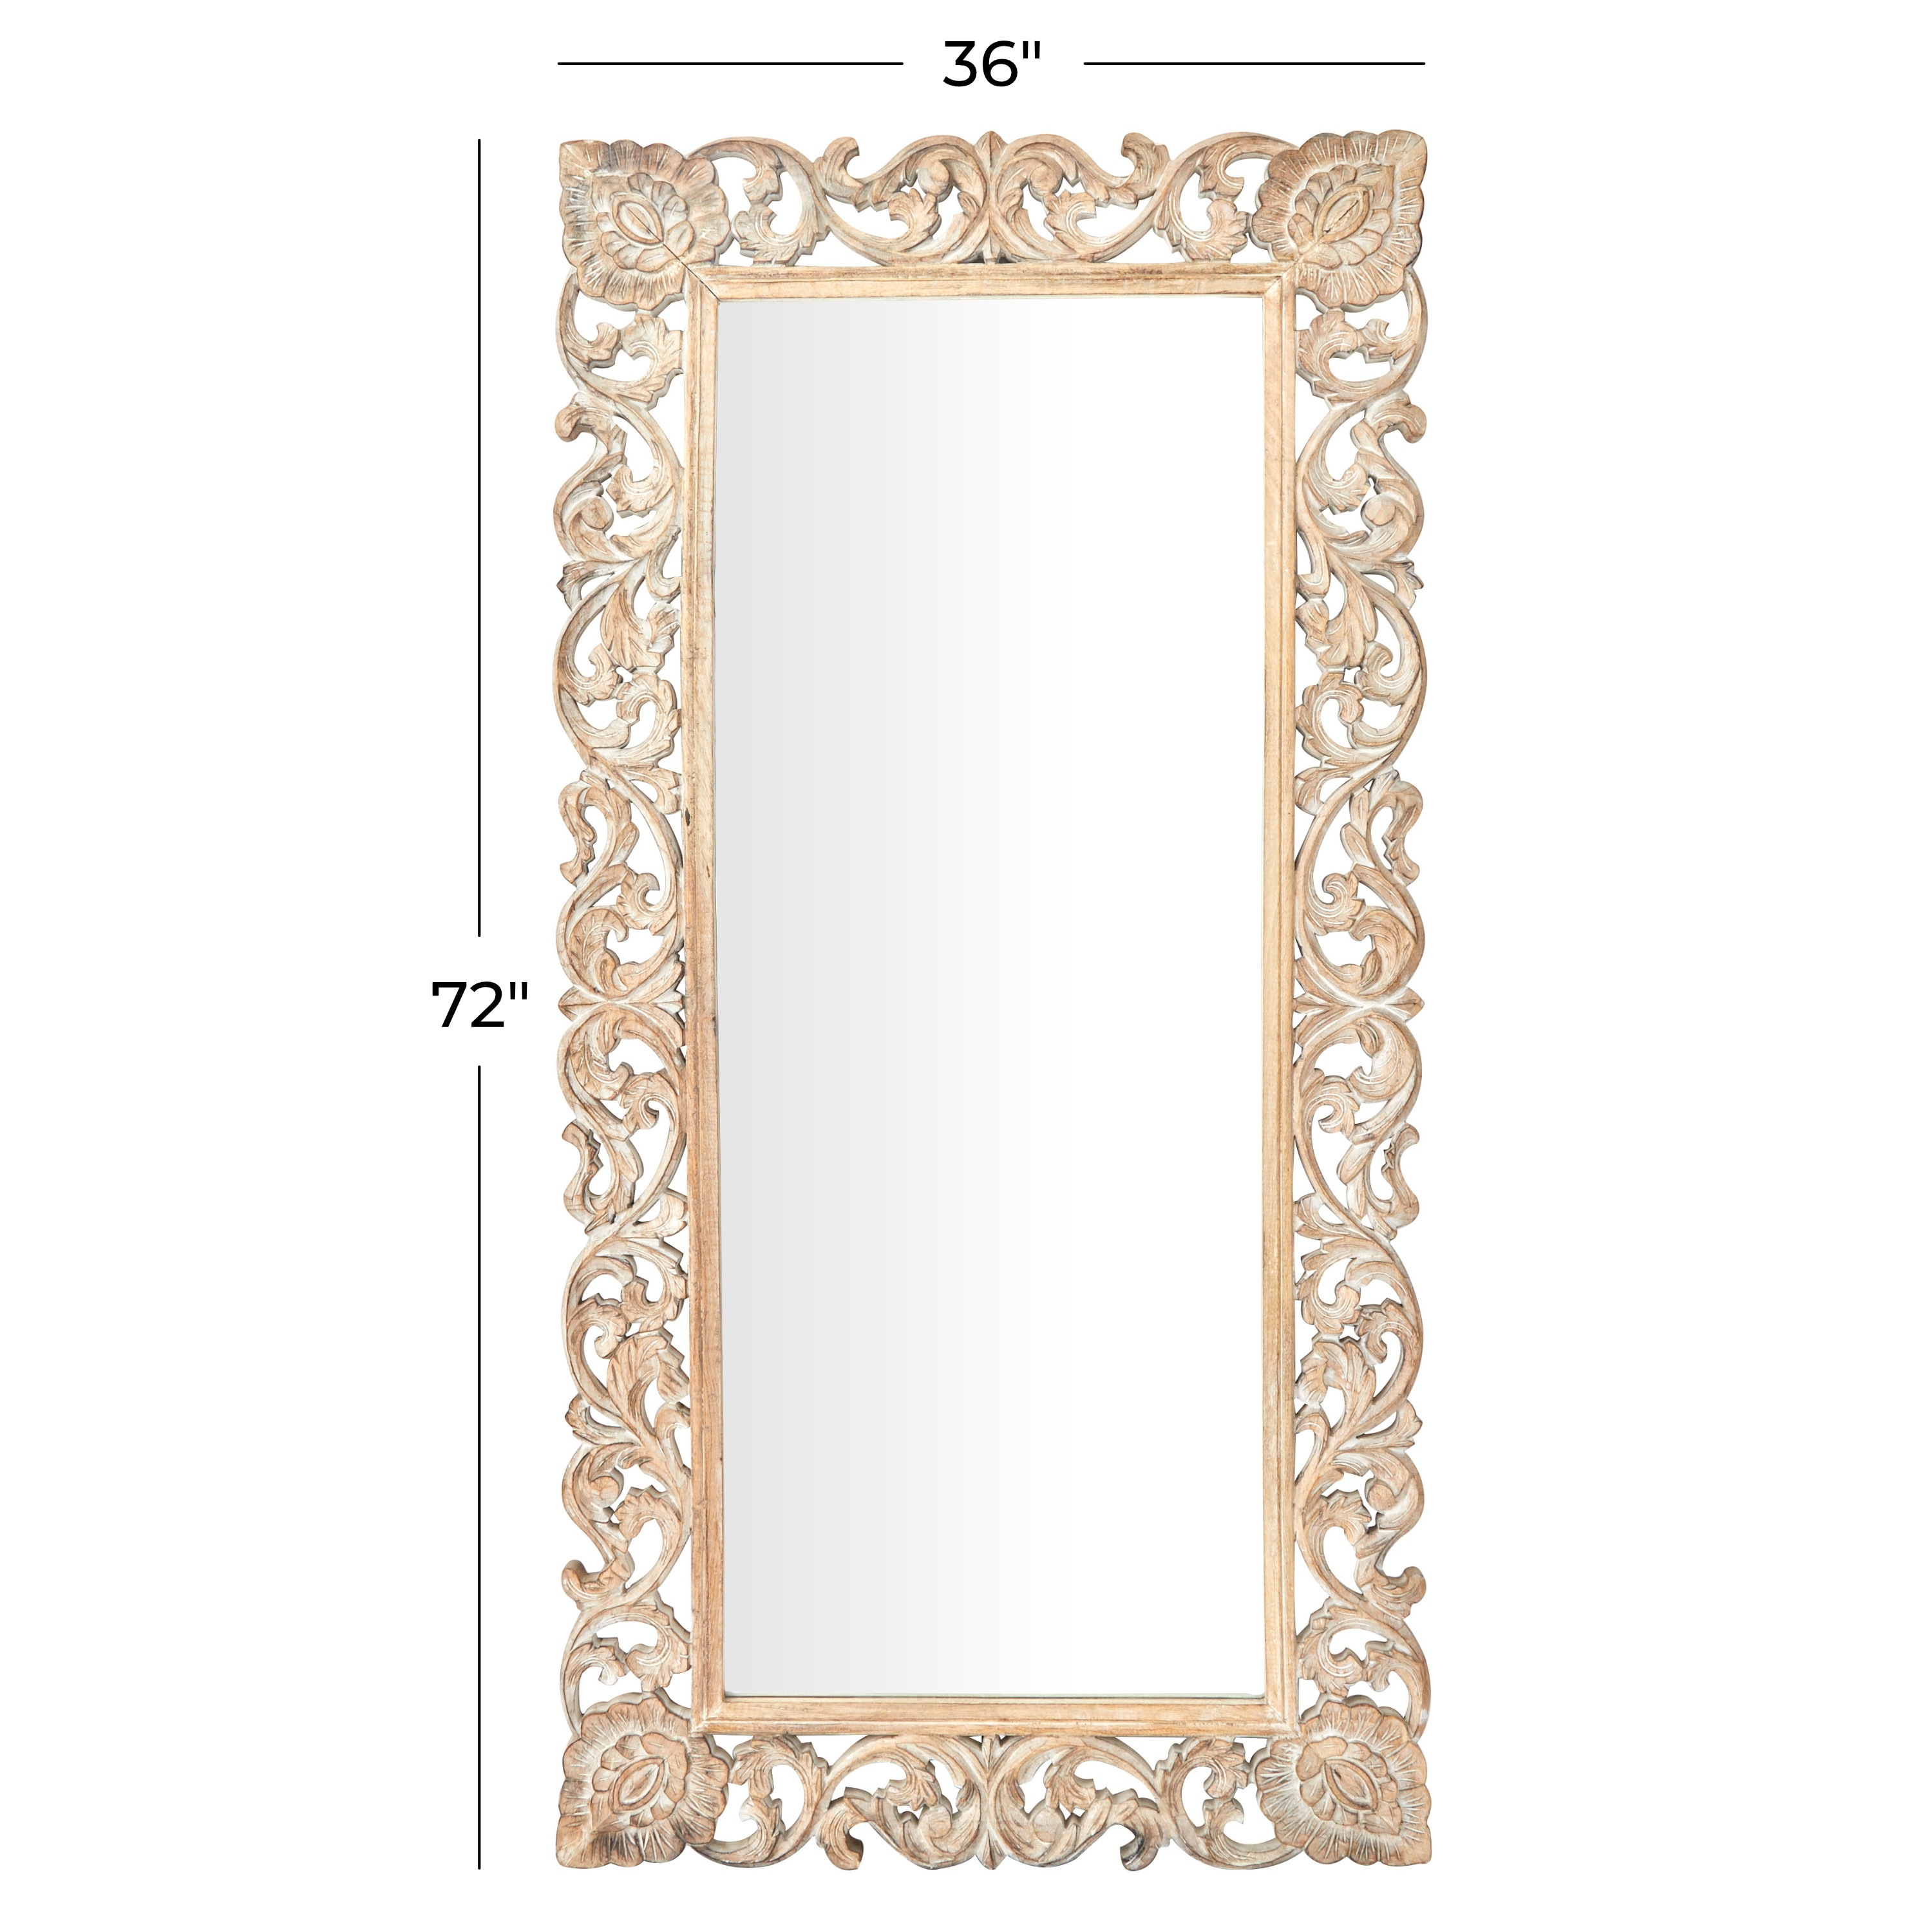 https://ak1.ostkcdn.com/images/products/is/images/direct/8c2a44ed6cc2ee85dd67f08cb4012de153c76c86/Light-Brown-Wood-Traditional-Wall-Mirror.jpg